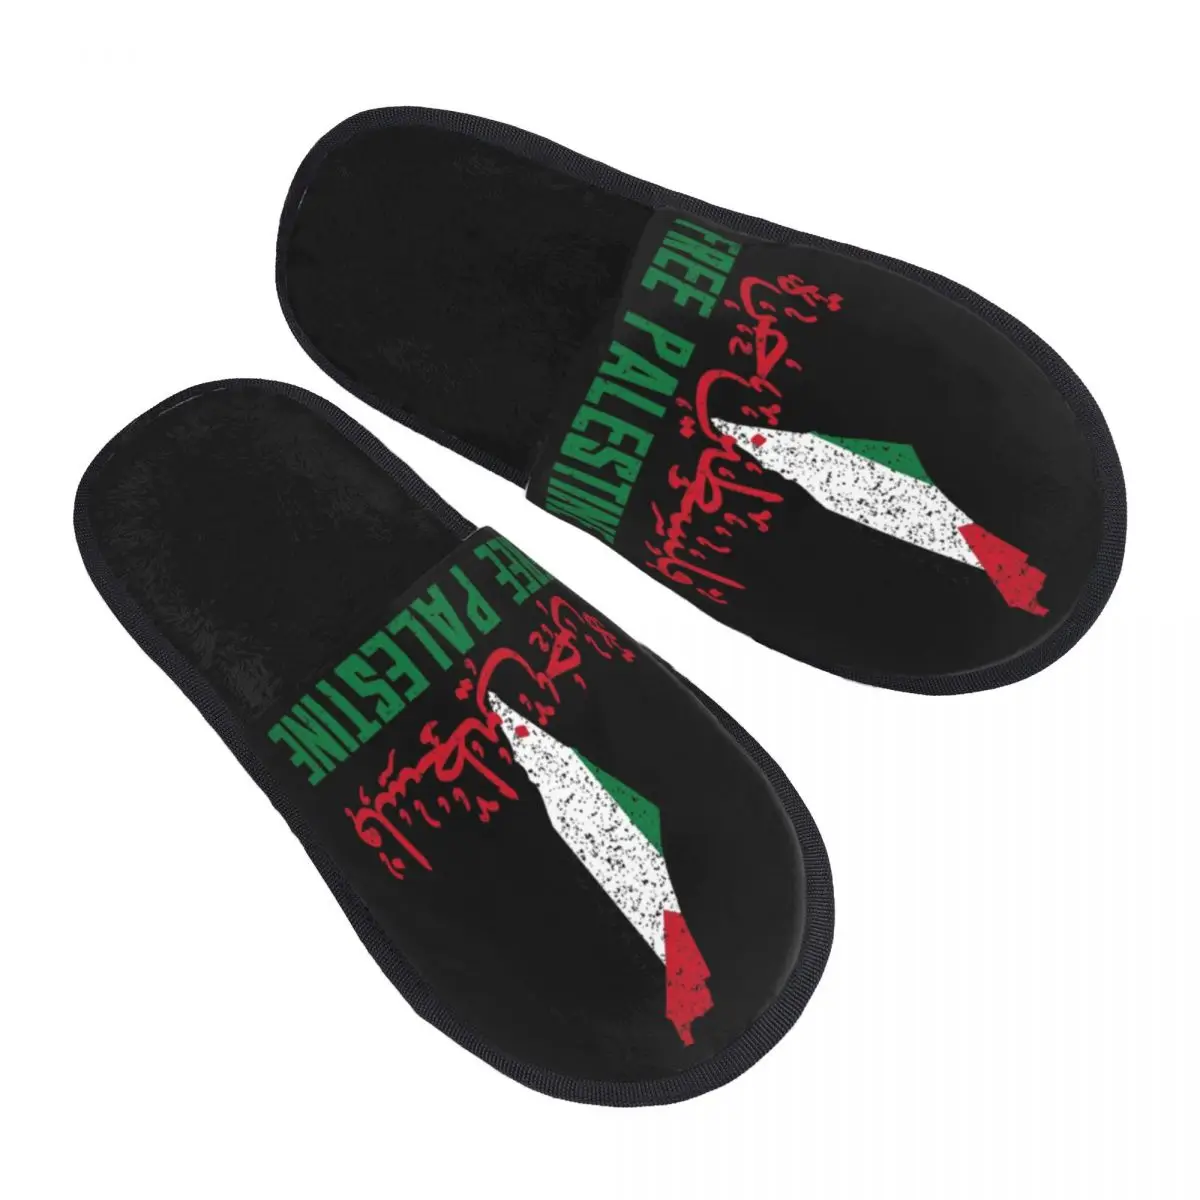 

Free Palestine In Arabic And English Calligraphy House Slippers Comfy Memory Foam Palestinian Flag Map Slip On Spa Slipper Shoes